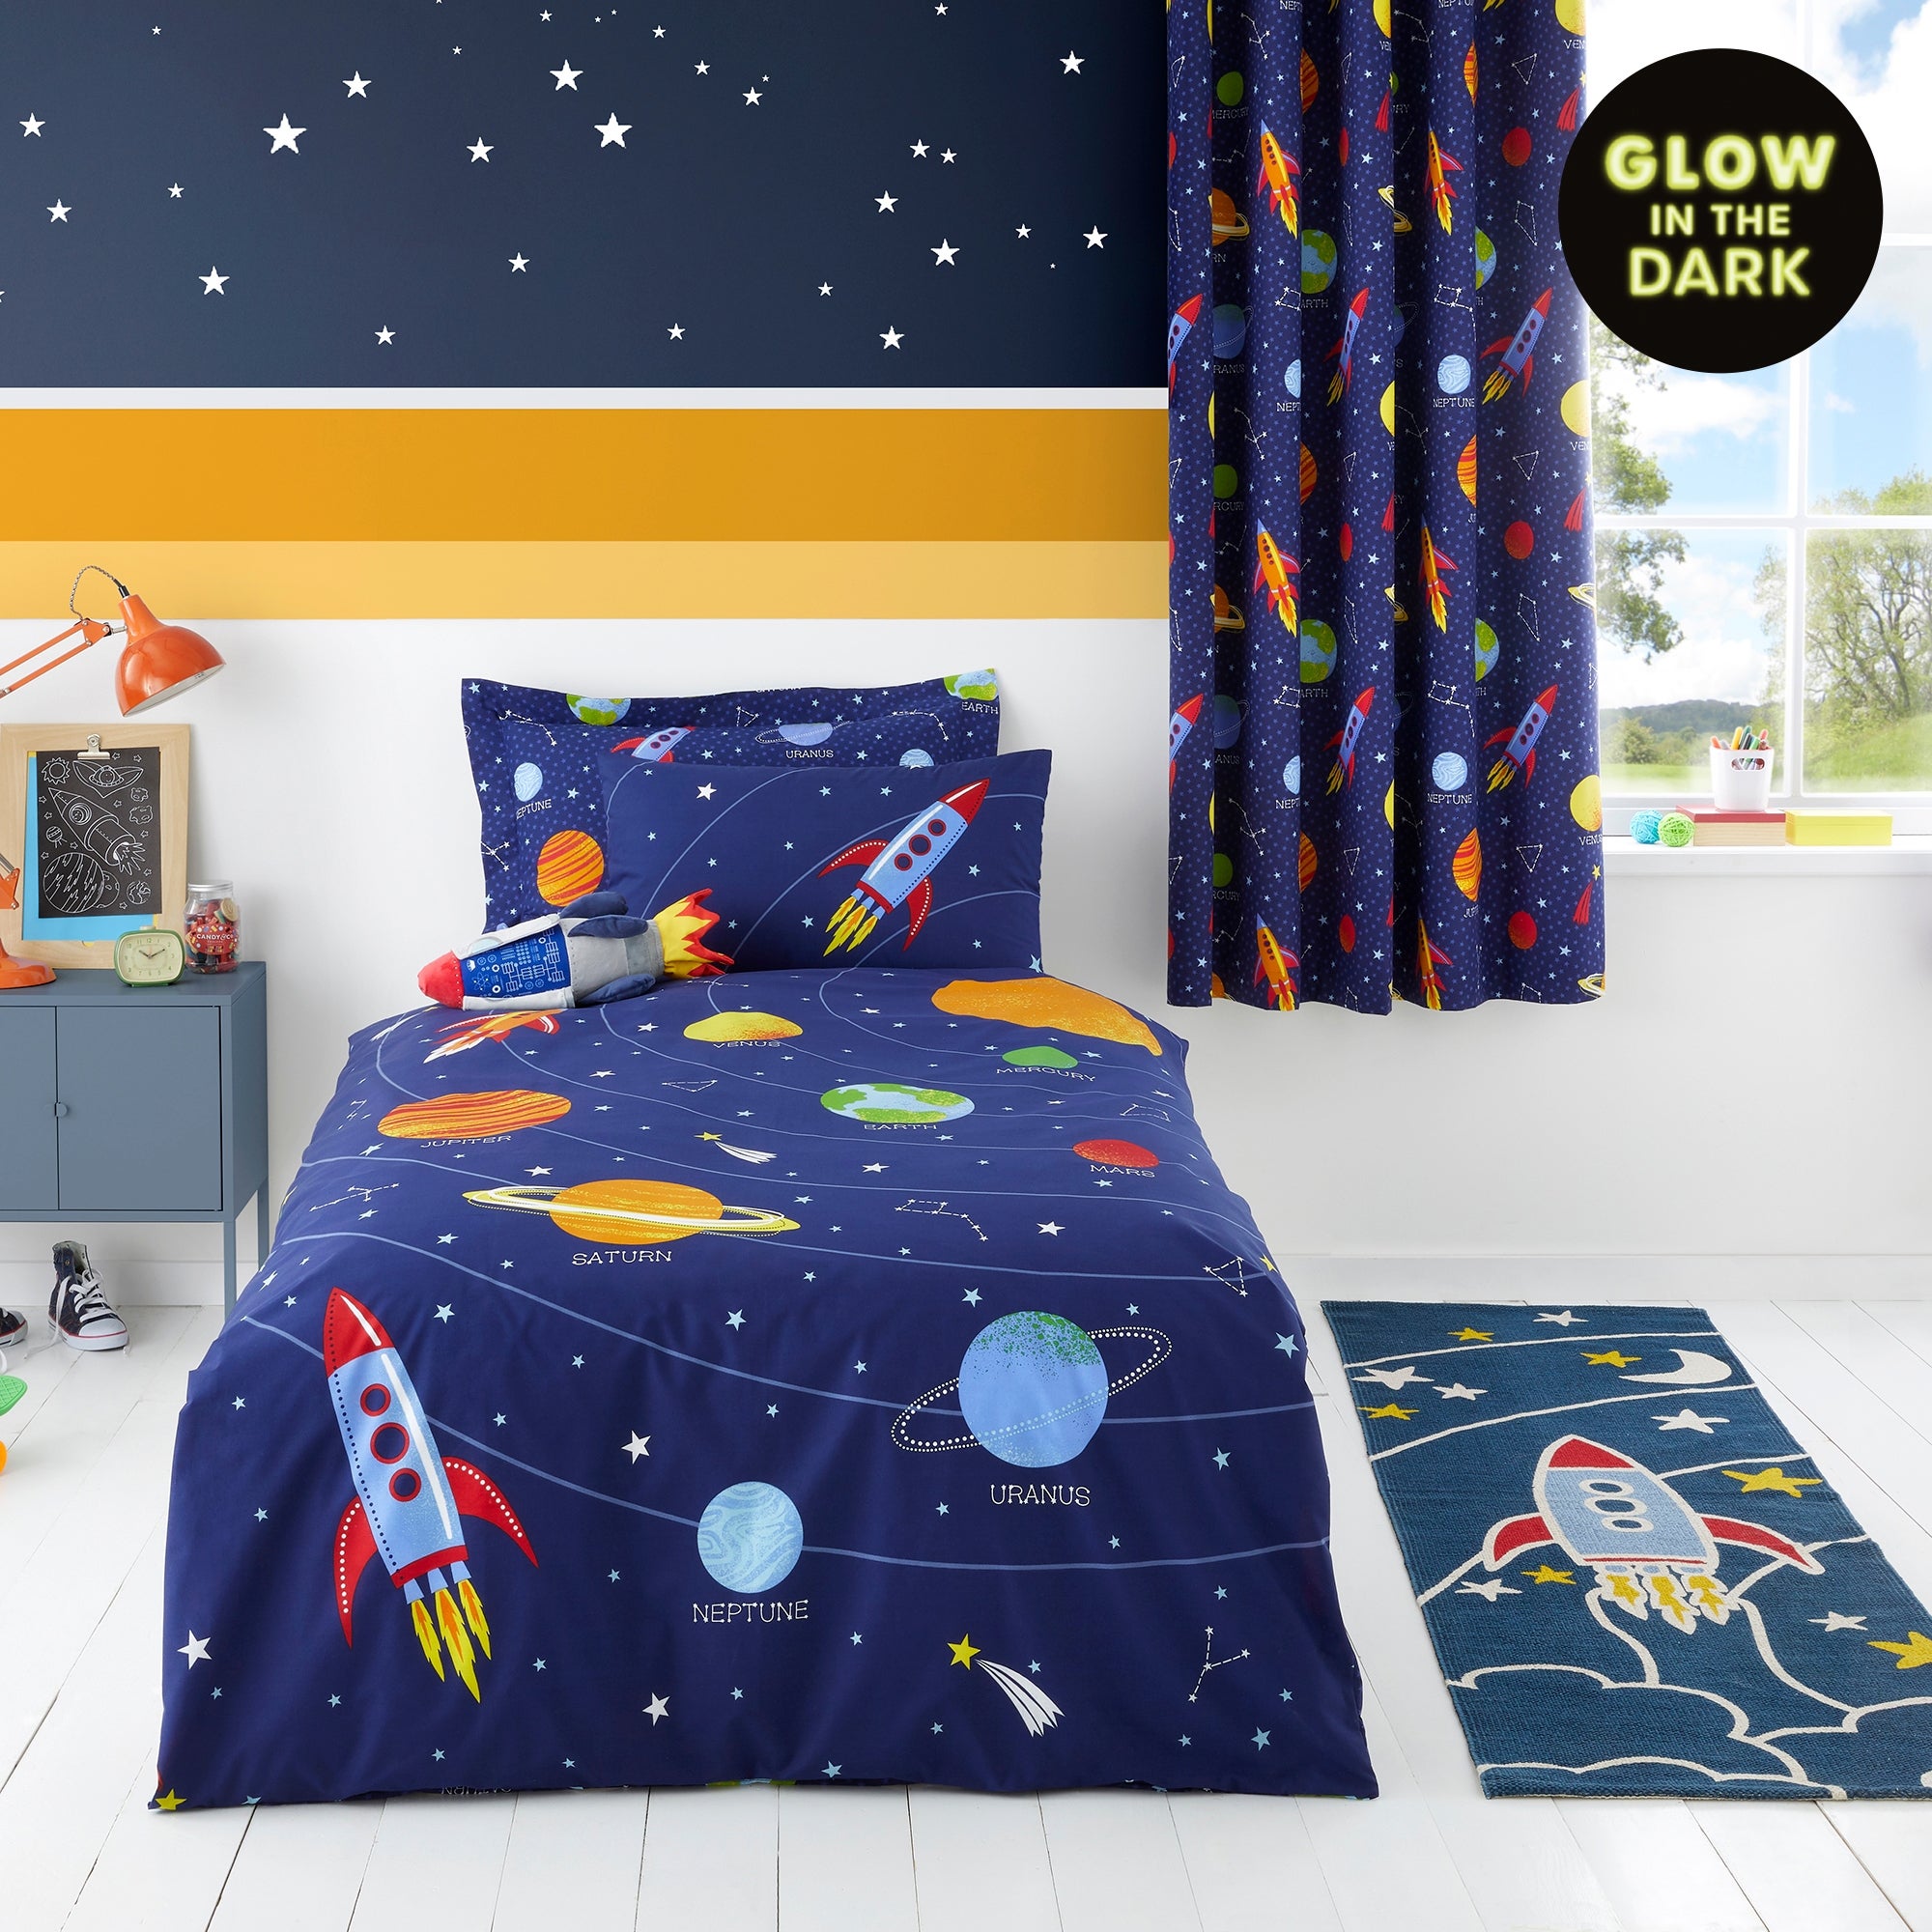 Space Glow In The Dark Duvet Cover And Pillowcase Set Navy Blue